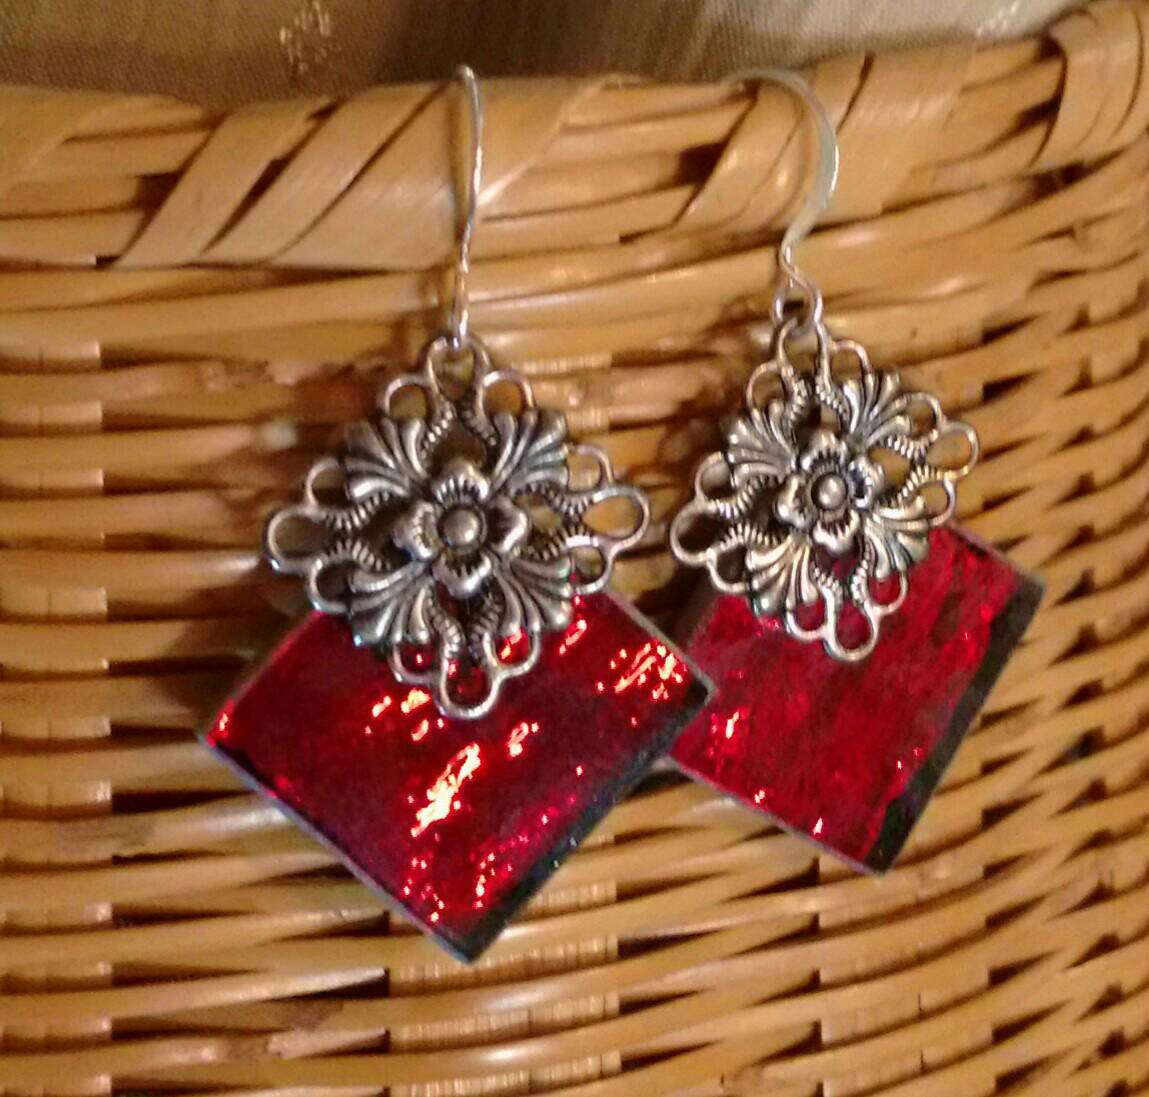 Handcrafted red ripple mirror glass stained glass earrings